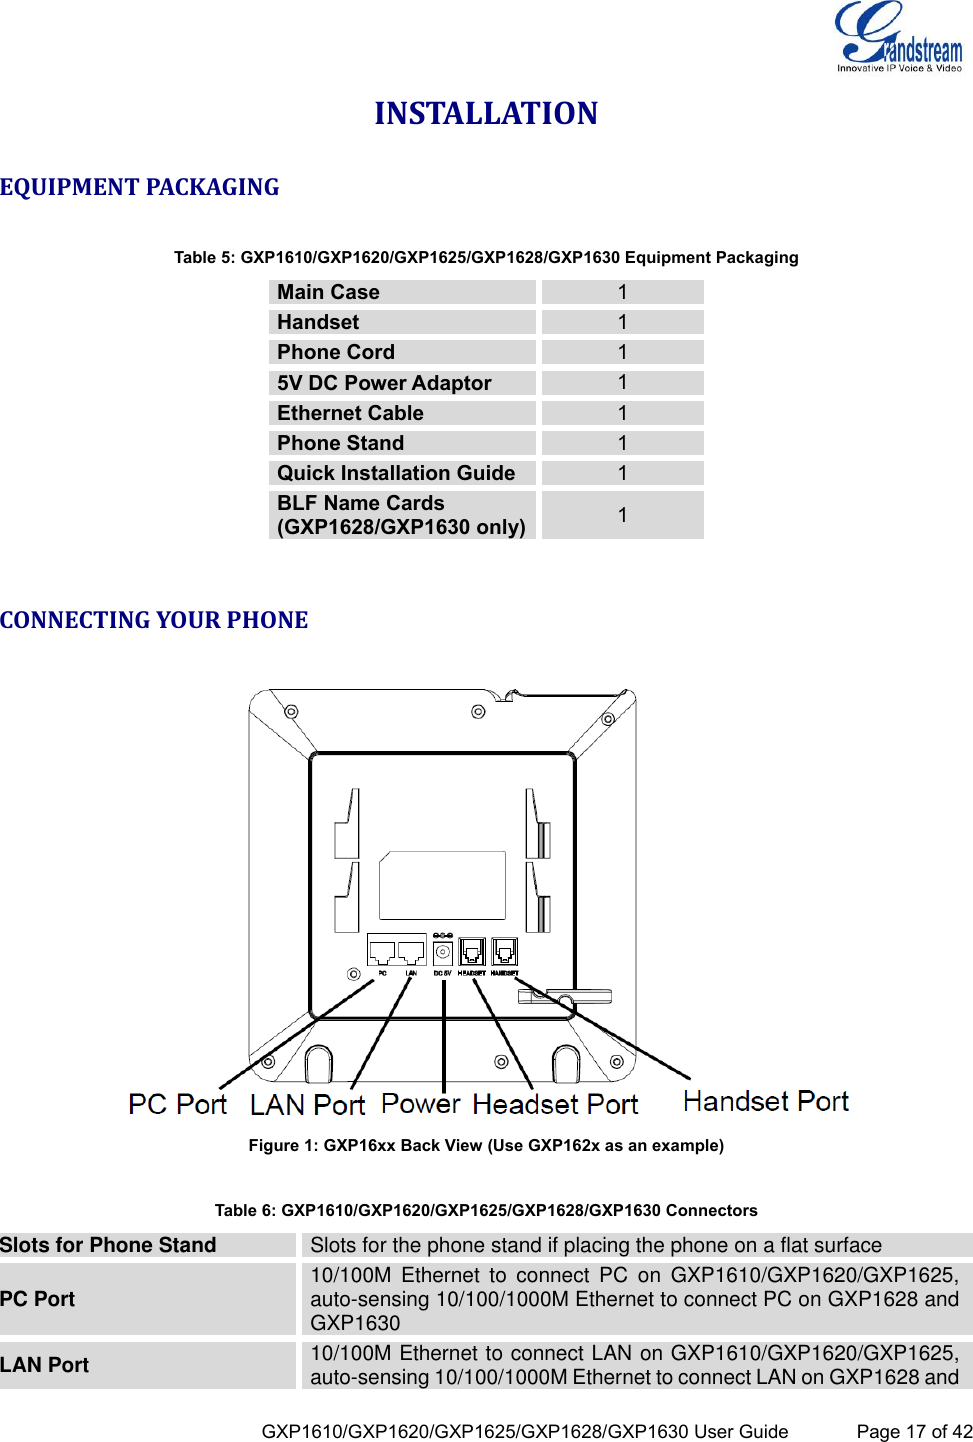  GXP1610/GXP1620/GXP1625/GXP1628/GXP1630 User Guide             Page 17 of 42 INSTALLATION EQUIPMENT PACKAGING  Table 5: GXP1610/GXP1620/GXP1625/GXP1628/GXP1630 Equipment Packaging Main Case 1 Handset 1 Phone Cord 1 5V DC Power Adaptor 1 Ethernet Cable 1 Phone Stand 1 Quick Installation Guide 1 BLF Name Cards (GXP1628/GXP1630 only) 1  CONNECTING YOUR PHONE   Figure 1: GXP16xx Back View (Use GXP162x as an example)  Table 6: GXP1610/GXP1620/GXP1625/GXP1628/GXP1630 Connectors Slots for Phone Stand Slots for the phone stand if placing the phone on a flat surface PC Port 10/100M  Ethernet  to  connect  PC  on  GXP1610/GXP1620/GXP1625, auto-sensing 10/100/1000M Ethernet to connect PC on GXP1628 and GXP1630 LAN Port 10/100M Ethernet to connect LAN on GXP1610/GXP1620/GXP1625, auto-sensing 10/100/1000M Ethernet to connect LAN on GXP1628 and 